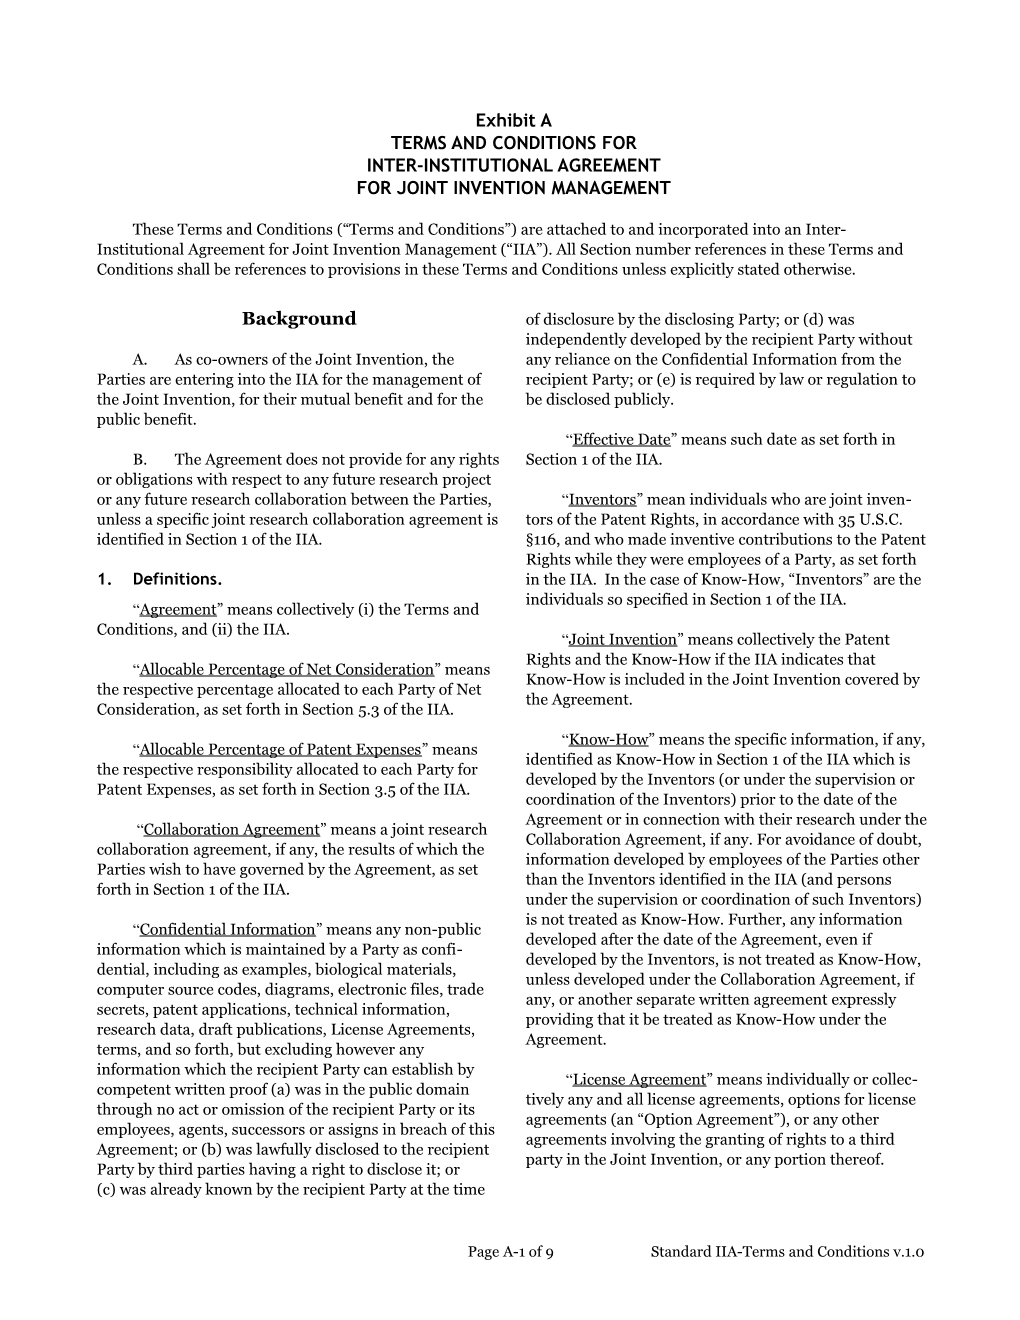 Page A-1 of 9Standard IIA-Terms and Conditions V.1.0